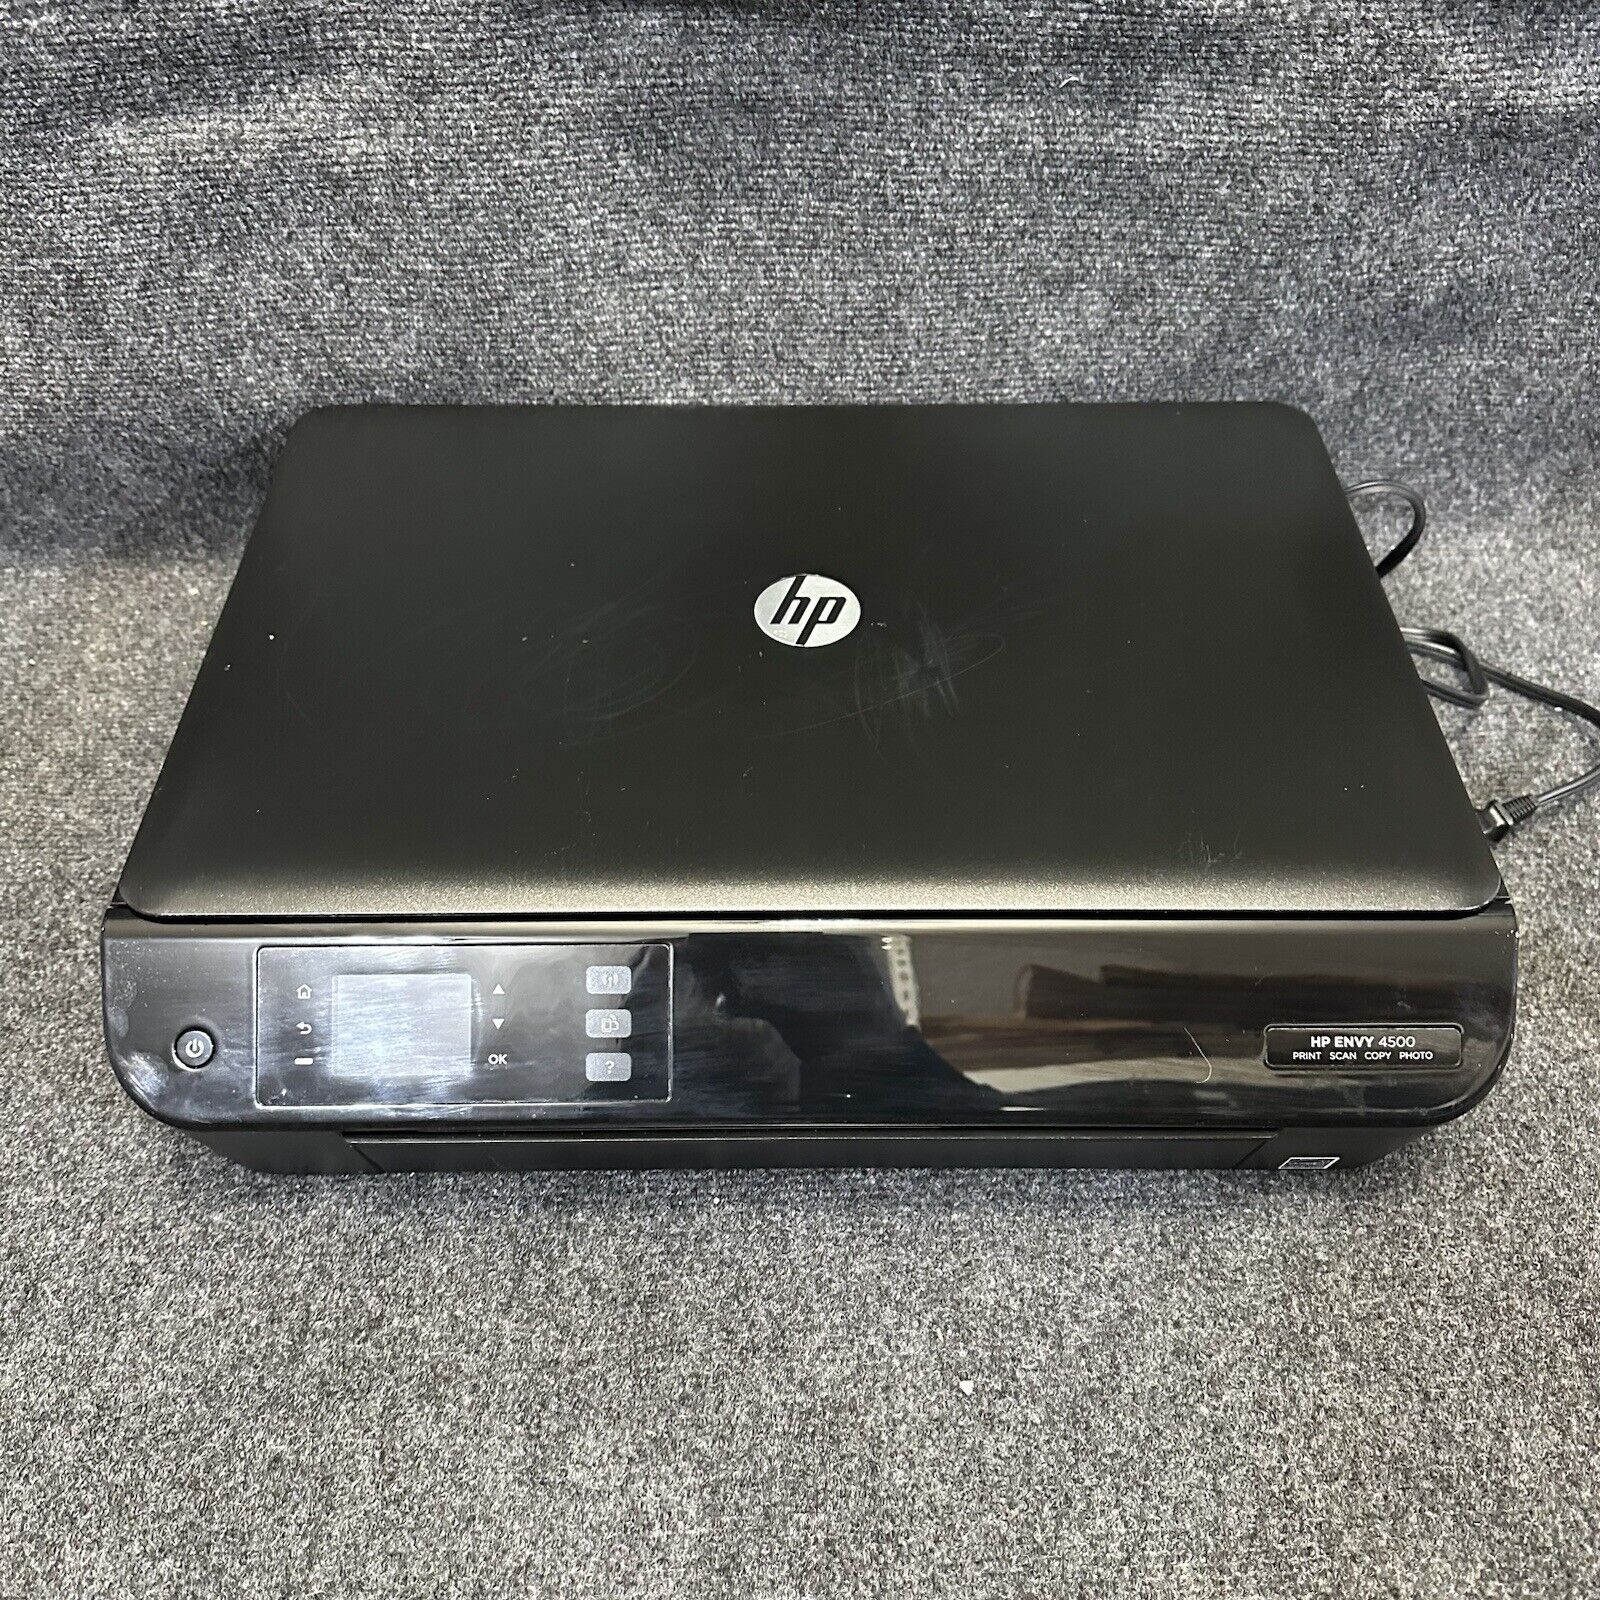 HP Envy 4500 All-in-One Inkjet Printer Model SDGOB-1301 Tested Working No Ink X4